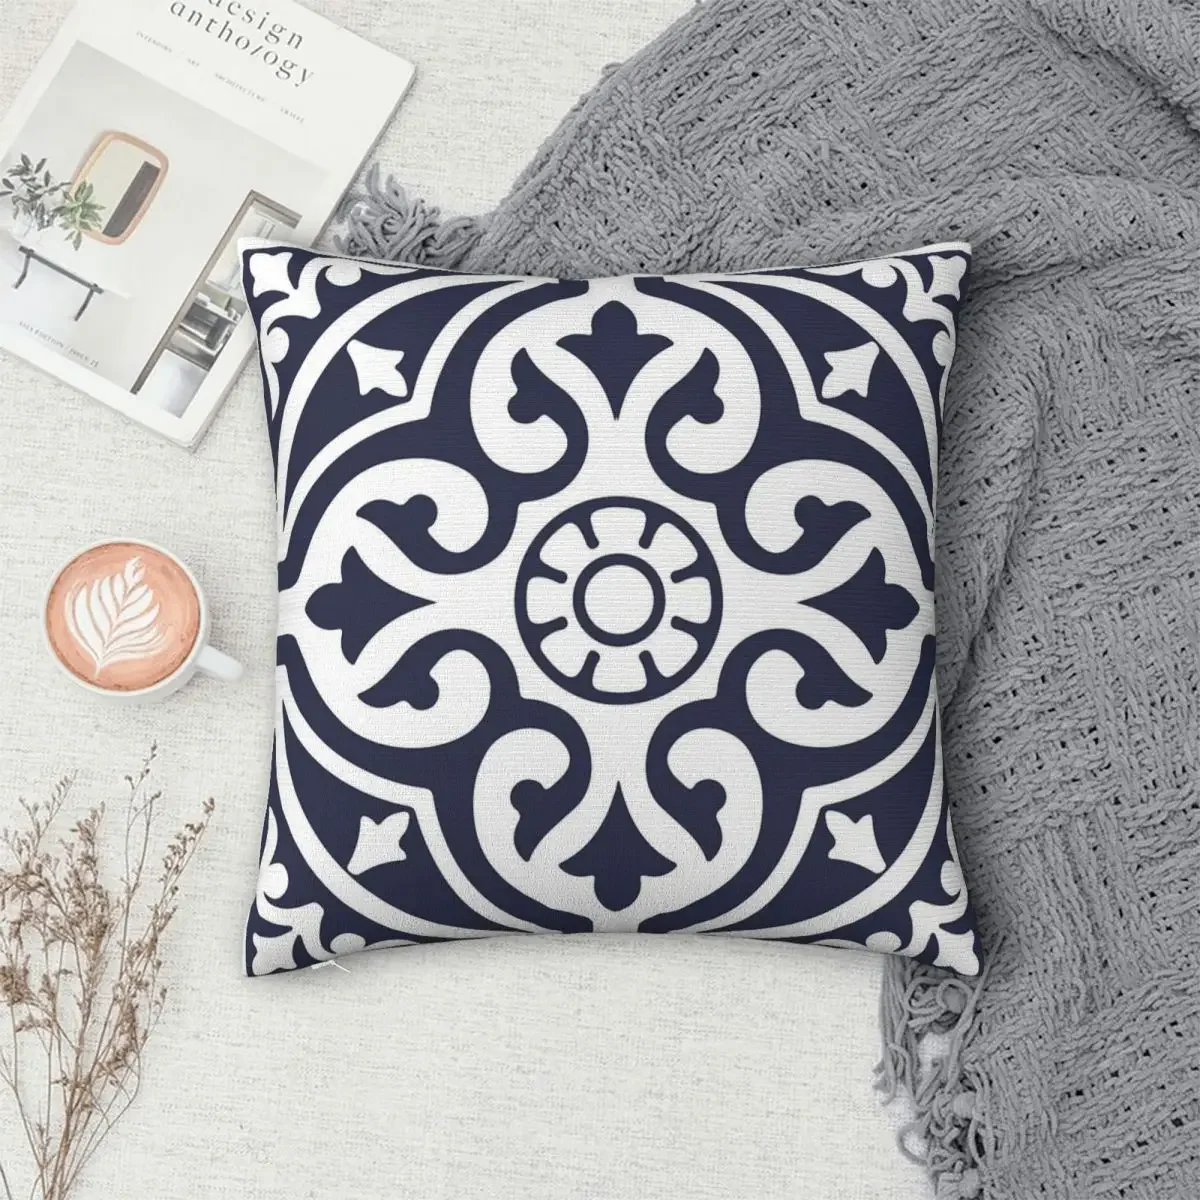 

Hamptons Blue And White Moroccan Talavera Tile Pillowcase Cushion Comfort Throw Pillow Sofa Decorative Cushions Used for Home